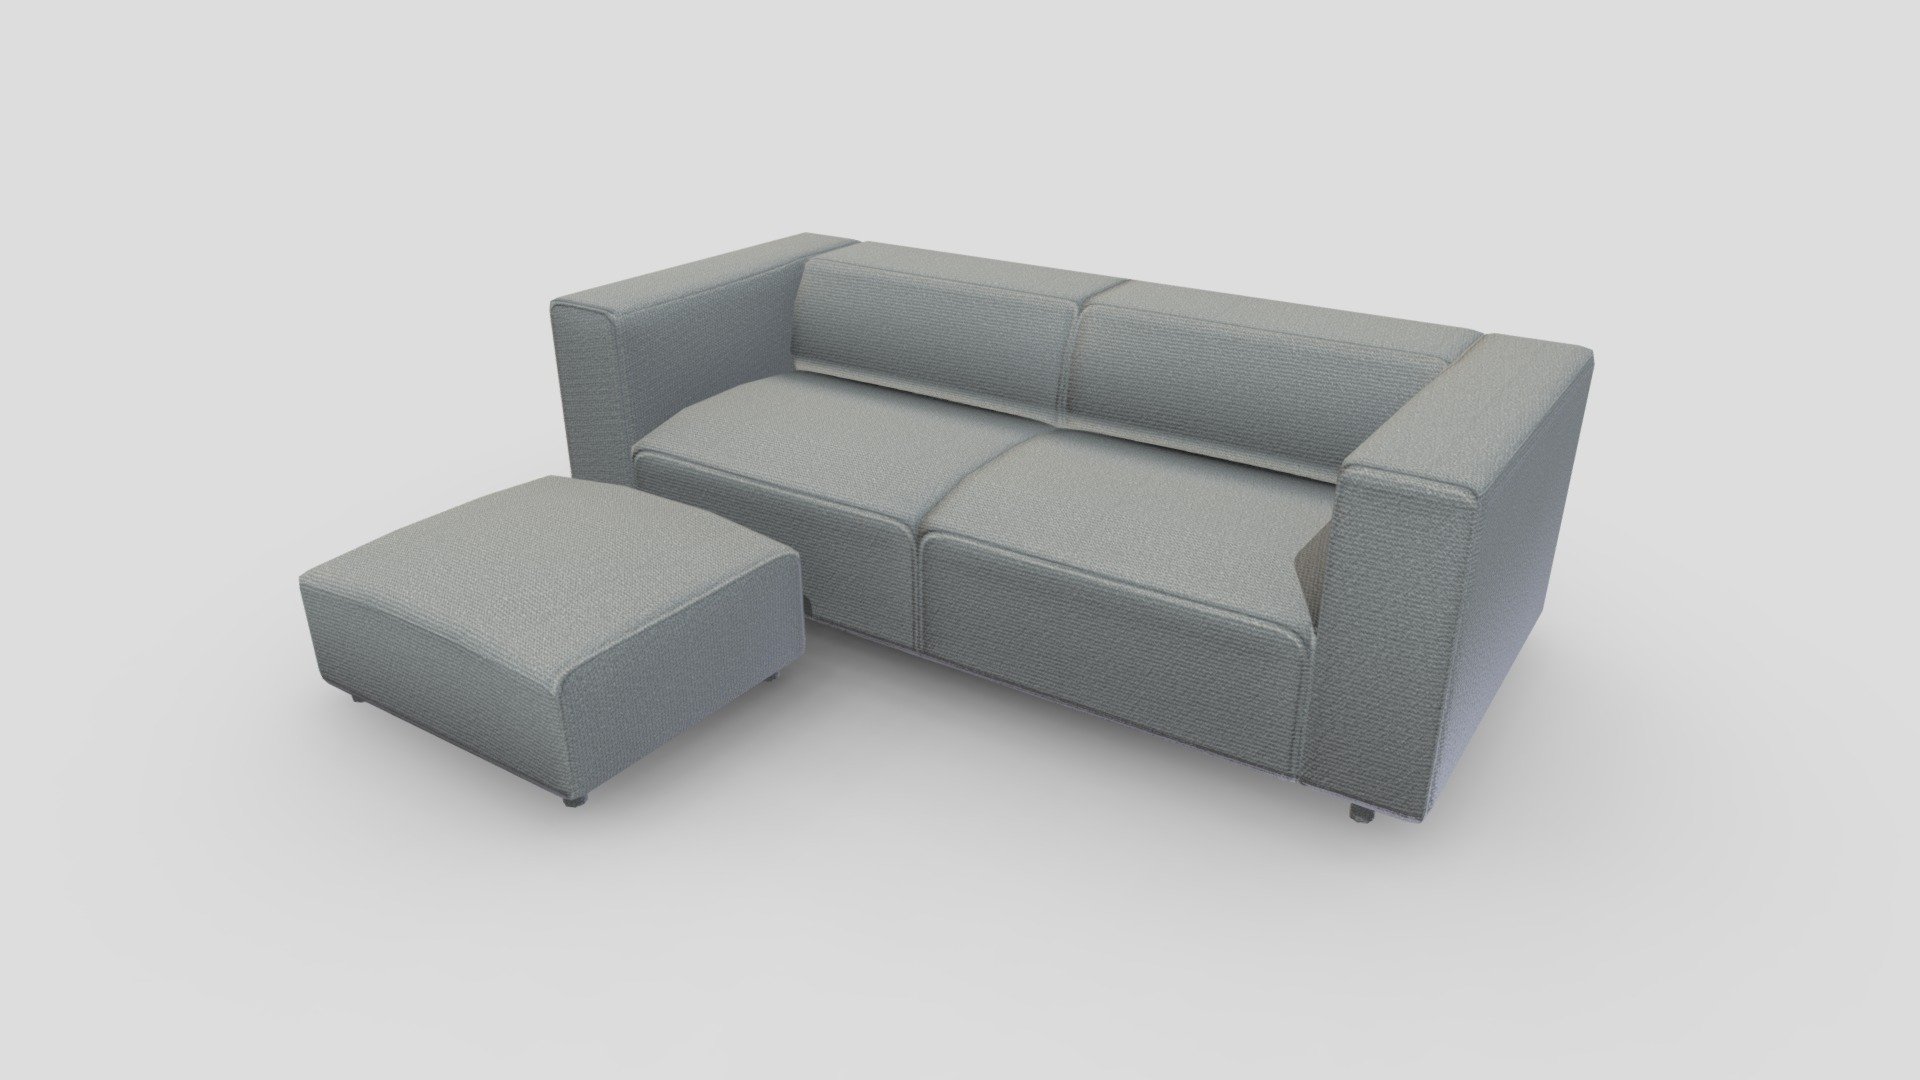 Low poly sofa booconcept carmoo, nice geometry and surface flow.

Plase visit our low poly 3d asset store: lowpolyhuman.com - Low Poly Sofa - BooConcept Carmo - Download Free 3D model by ROH3D 3d model